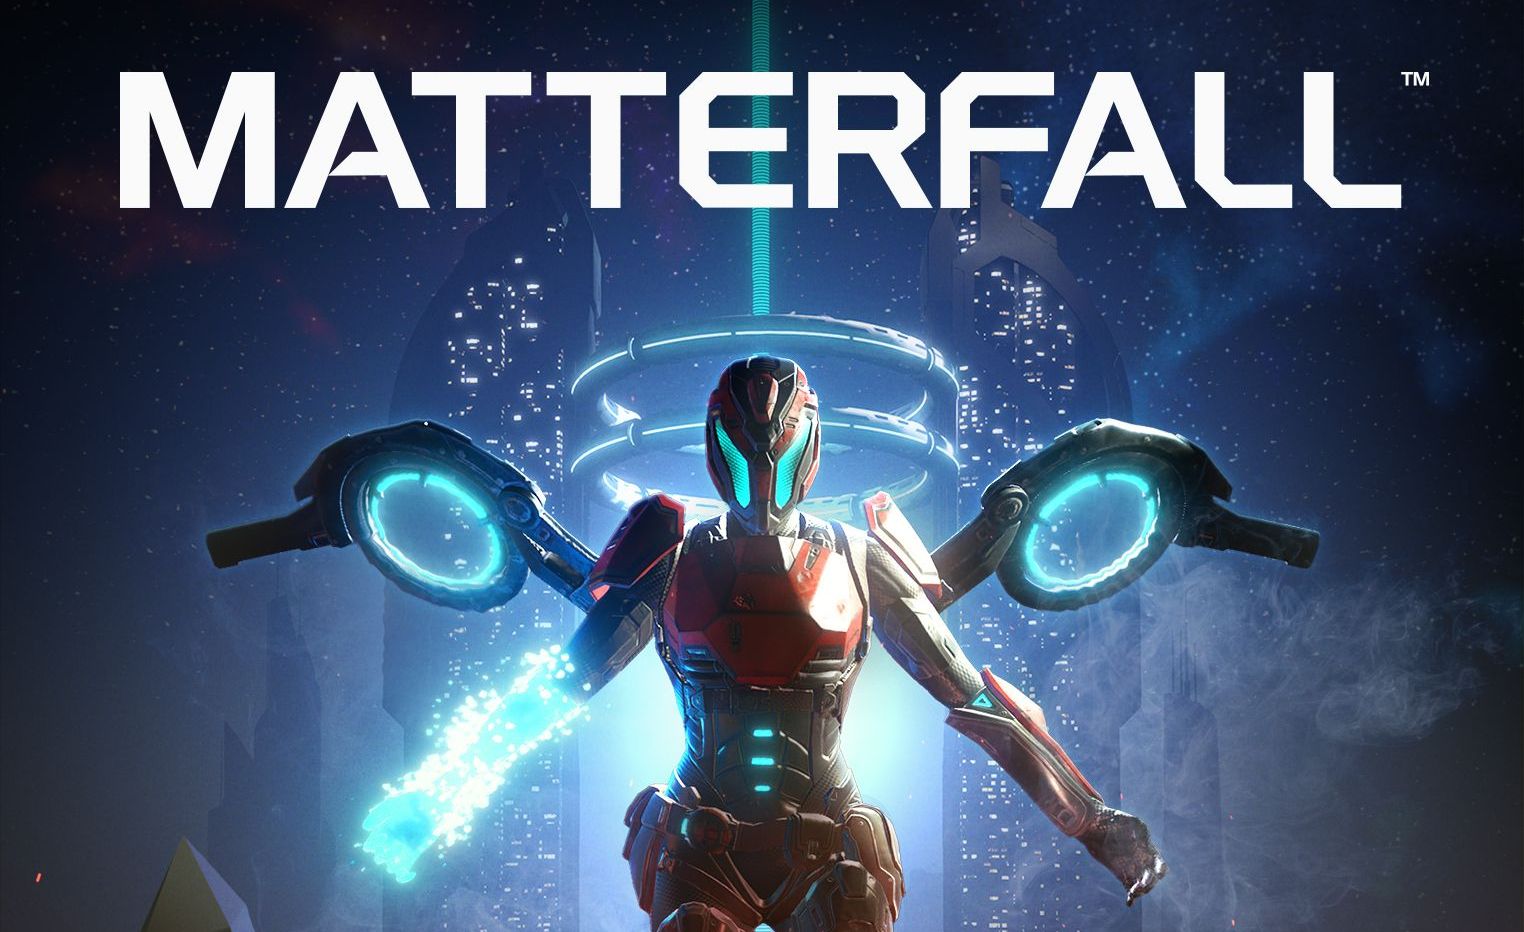 Review game Matterfall: bullet hell shooter originally from Finland